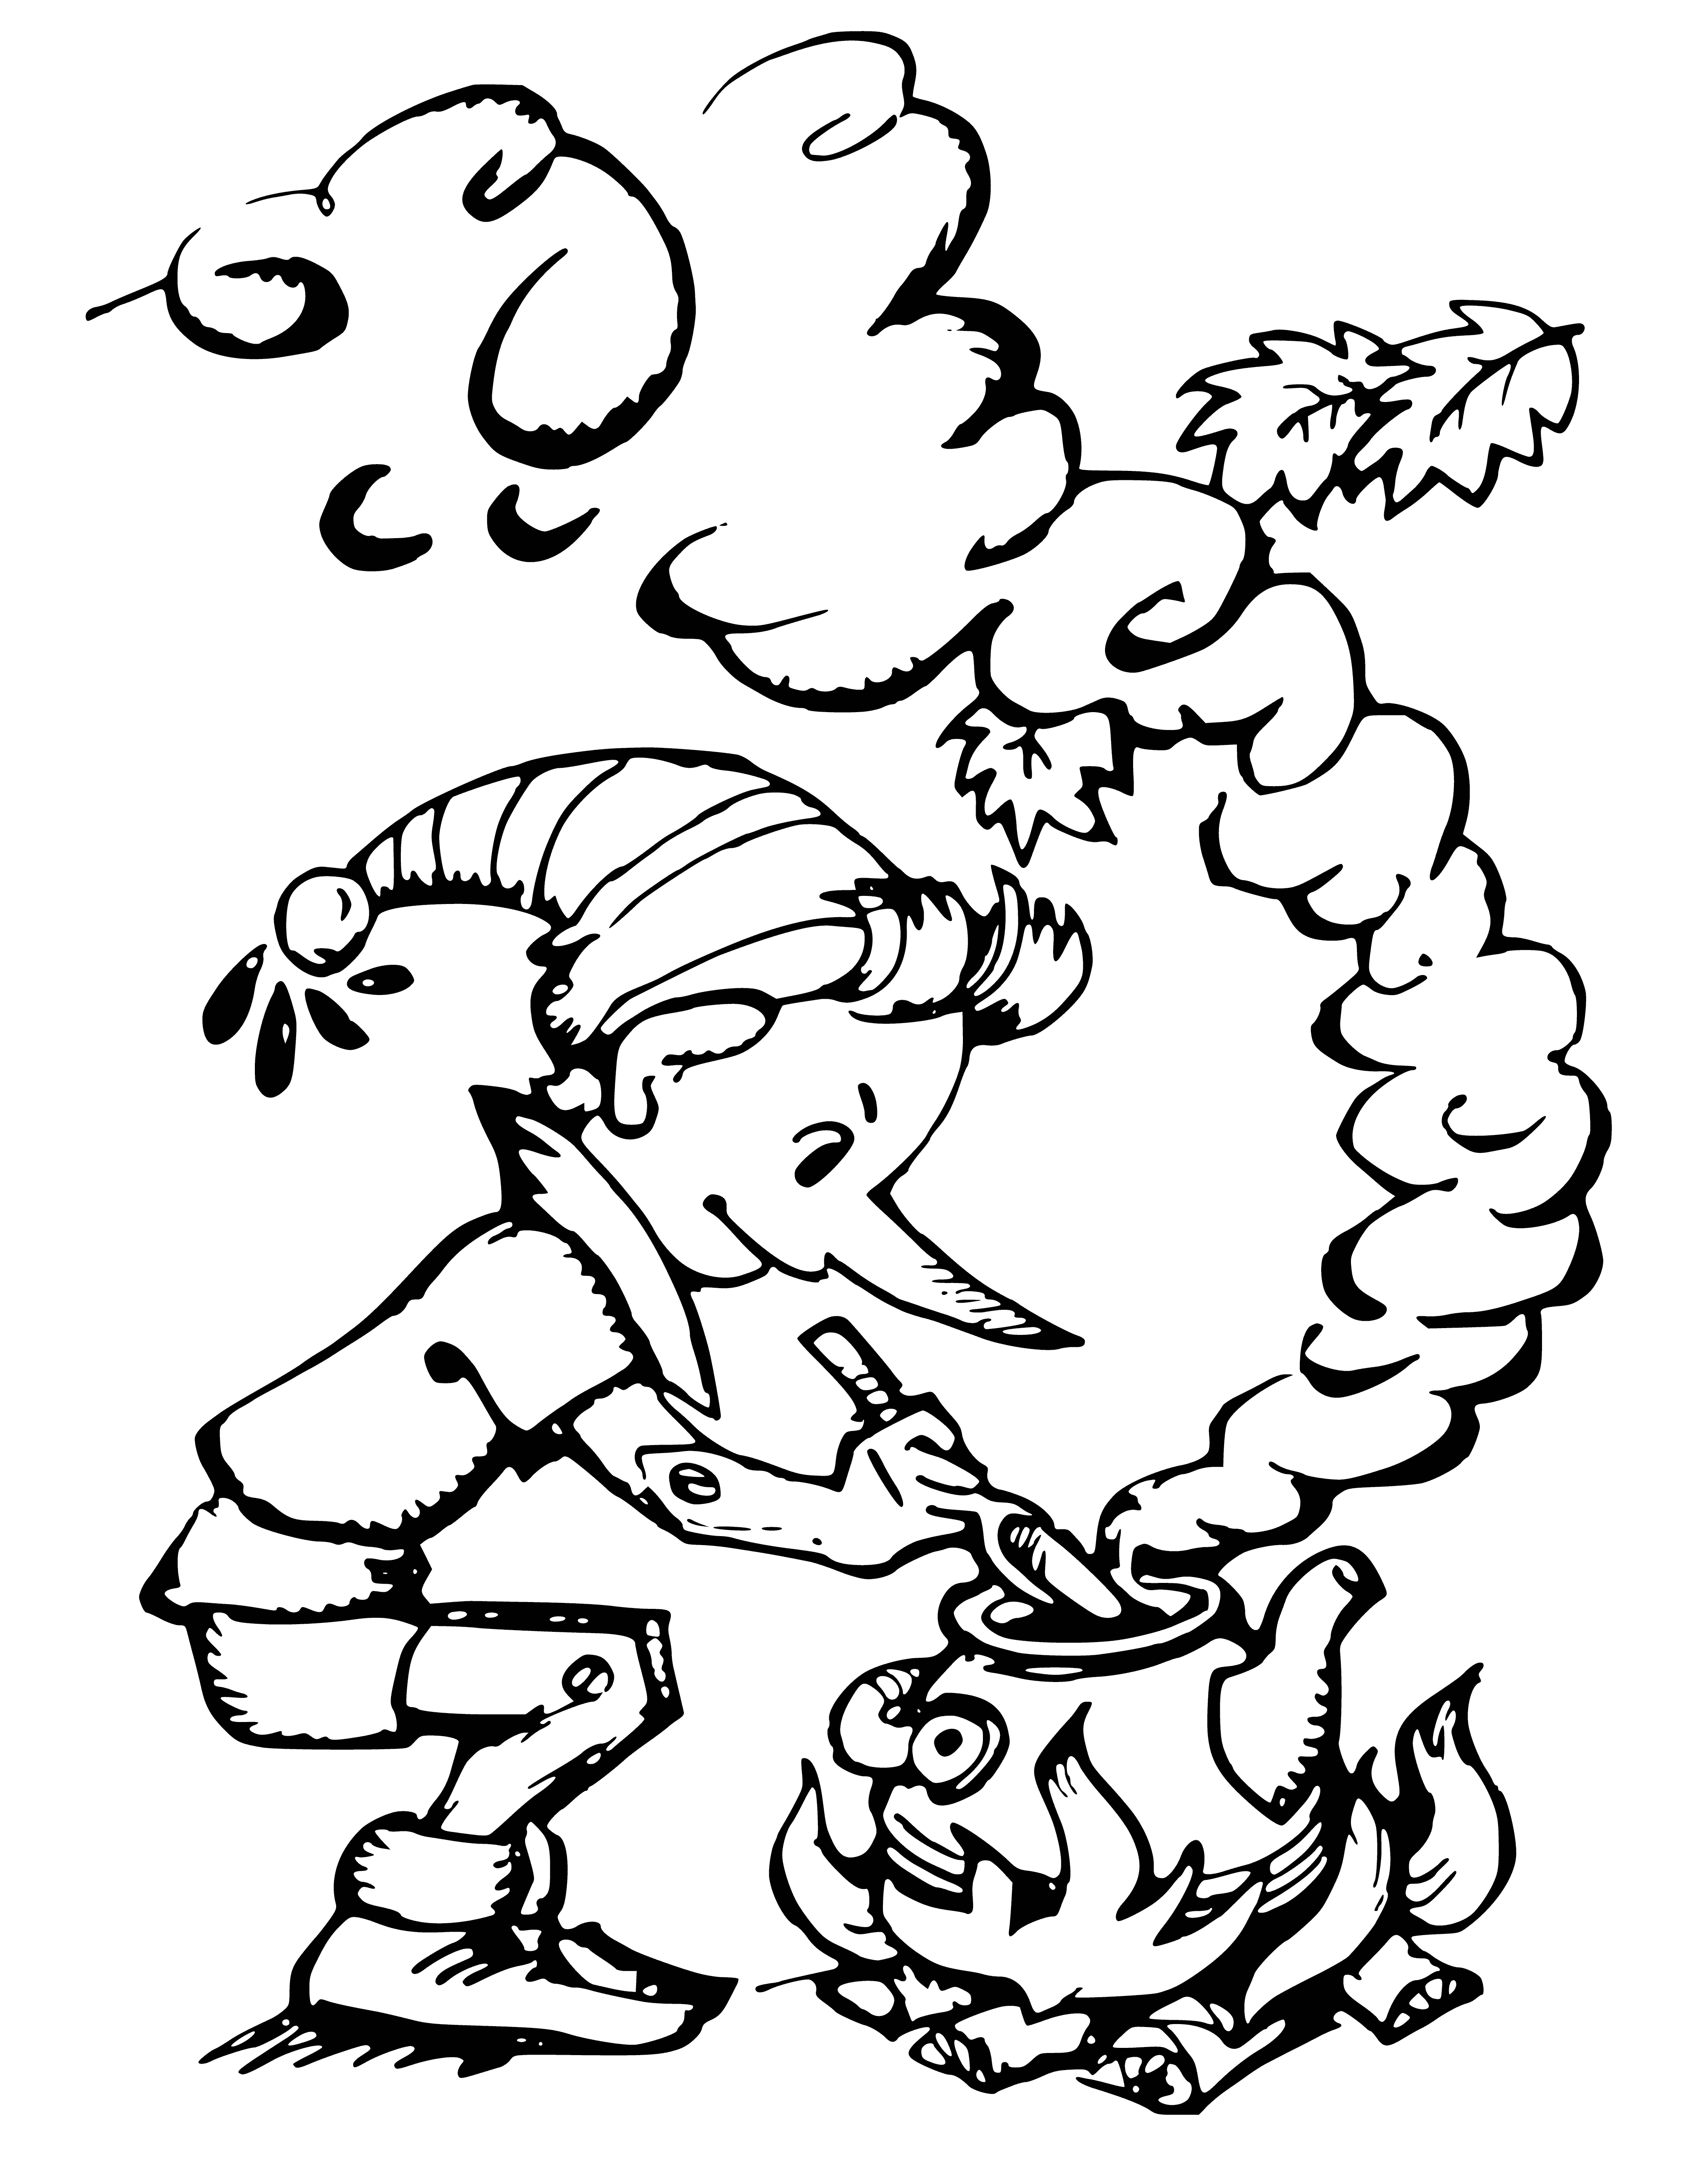 coloring page: Pinocchio is cooking a stew of veggies in the kitchen, stirring a large pot with a wooden spoon, and enjoying himself with his wooden coat and hat nearby.